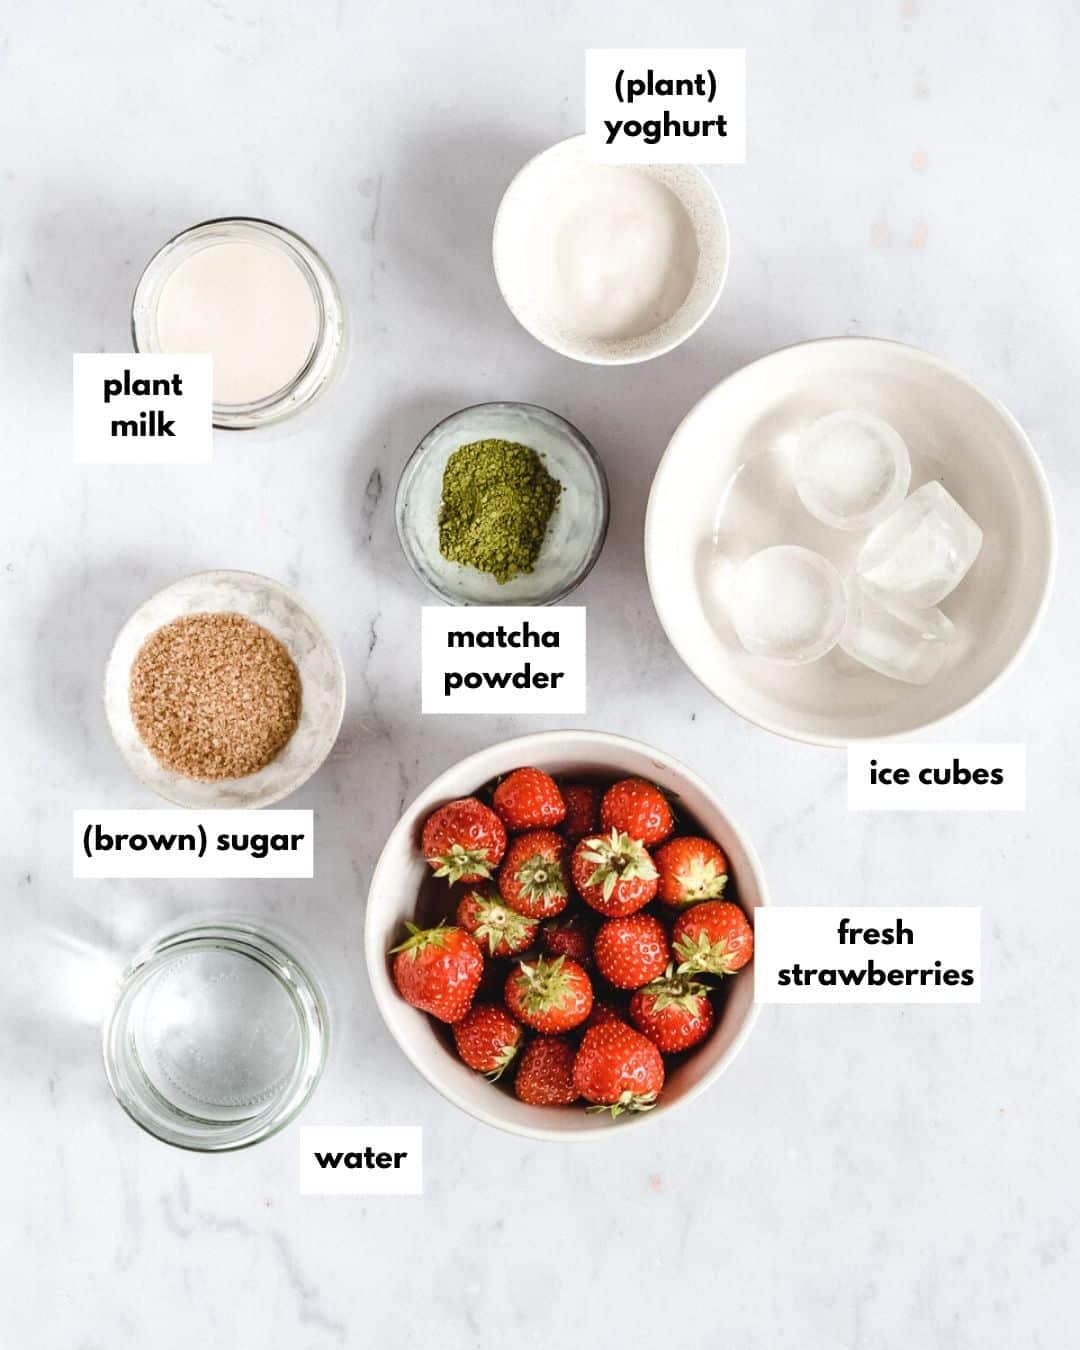 all ingredients needed to make strawberry matcha latte.